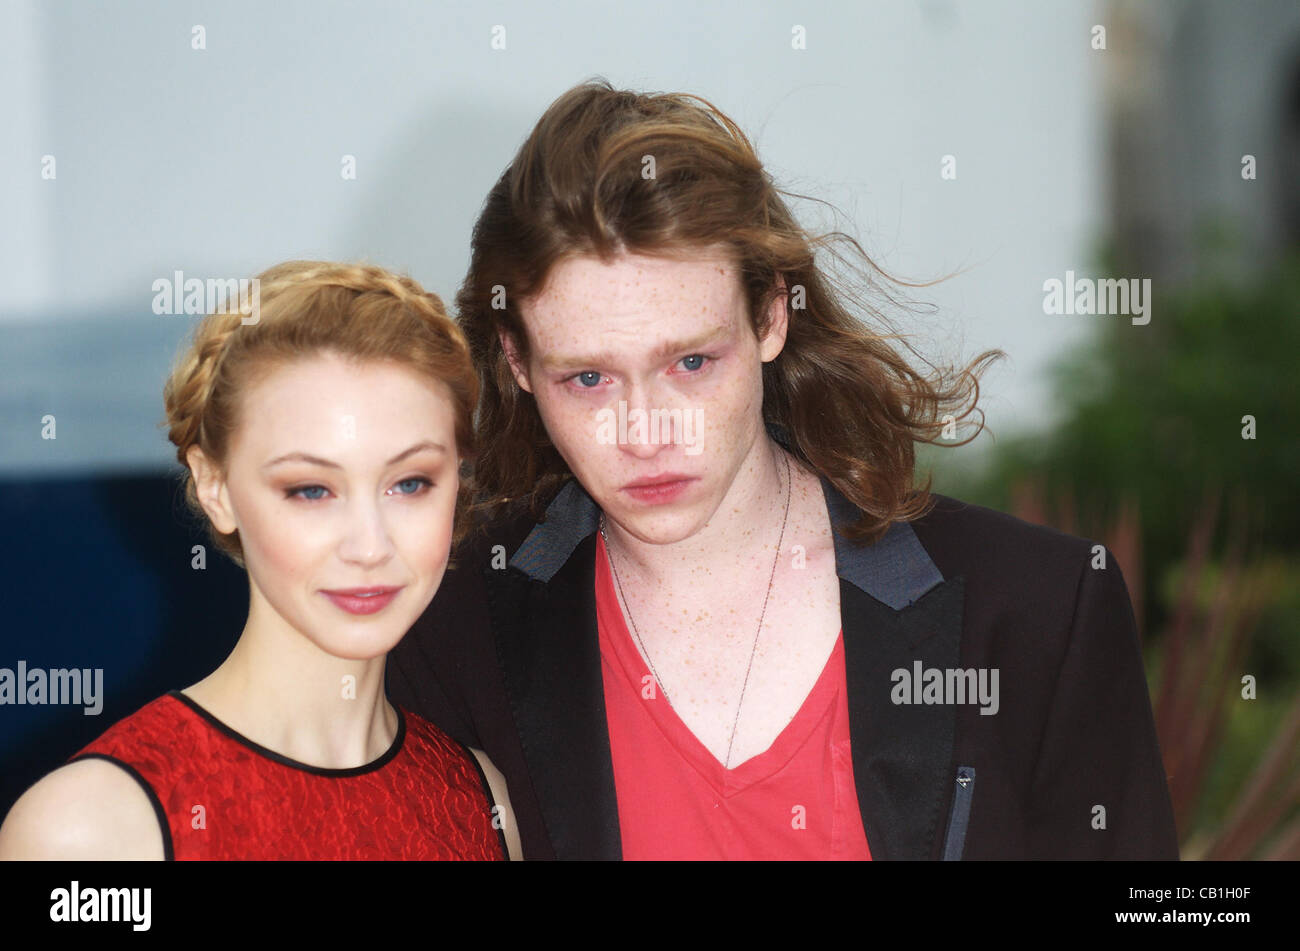 Cannes, France. 20/05/2012.(L-R) Caleb Landry Jones and Sarah Gadon attend the 'Antiviral' Photocall during thr 65th Annual Cannes Film Festival at Palais des Festivals Stock Photo